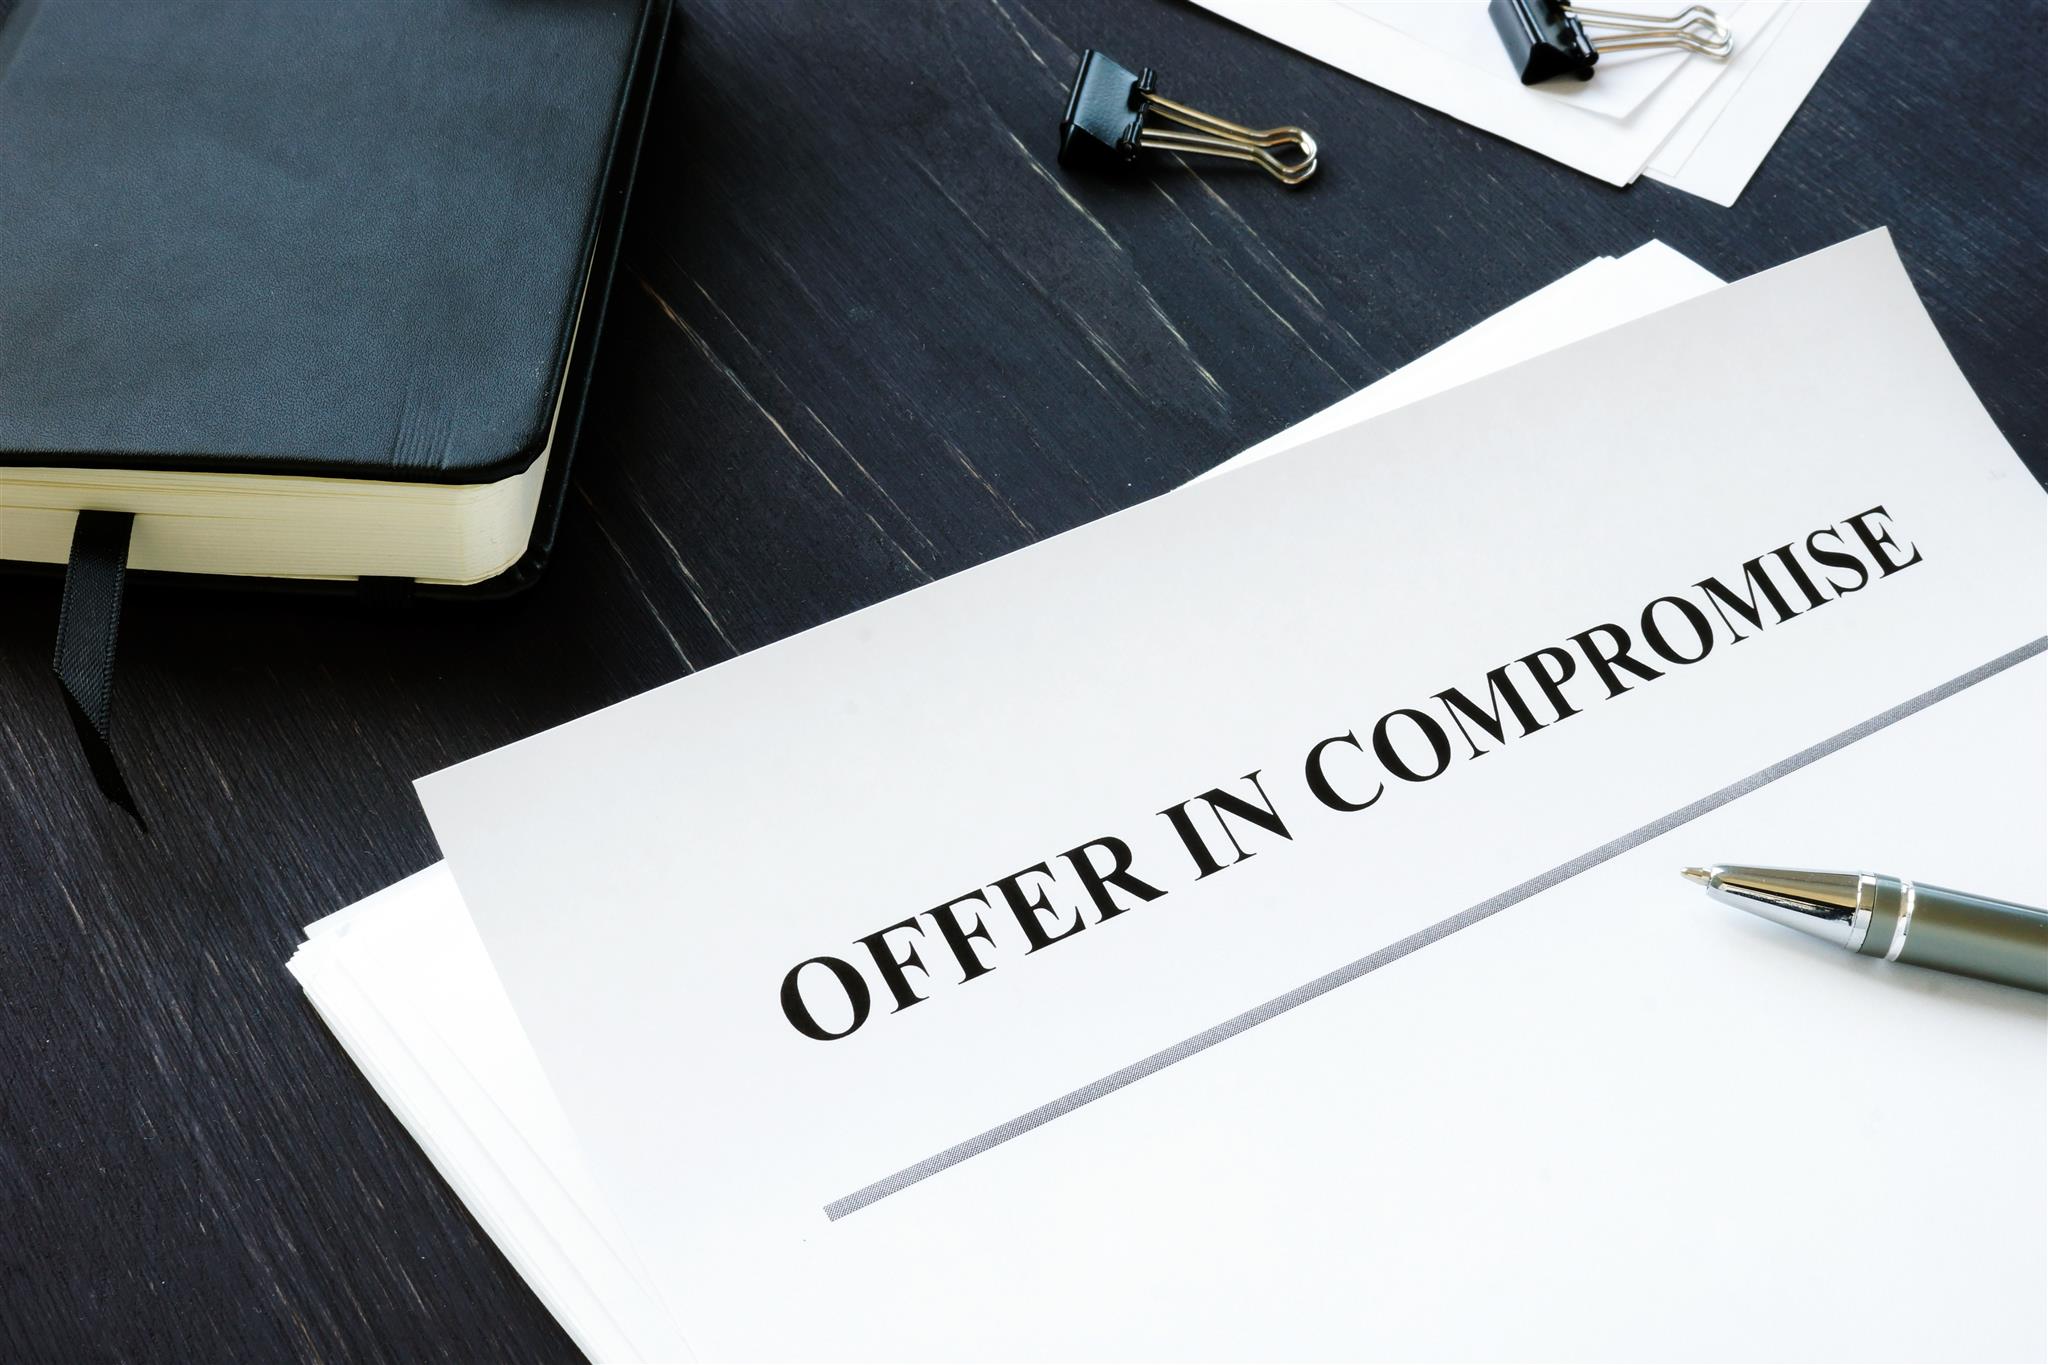 offer in compromise dallas-ae87c659